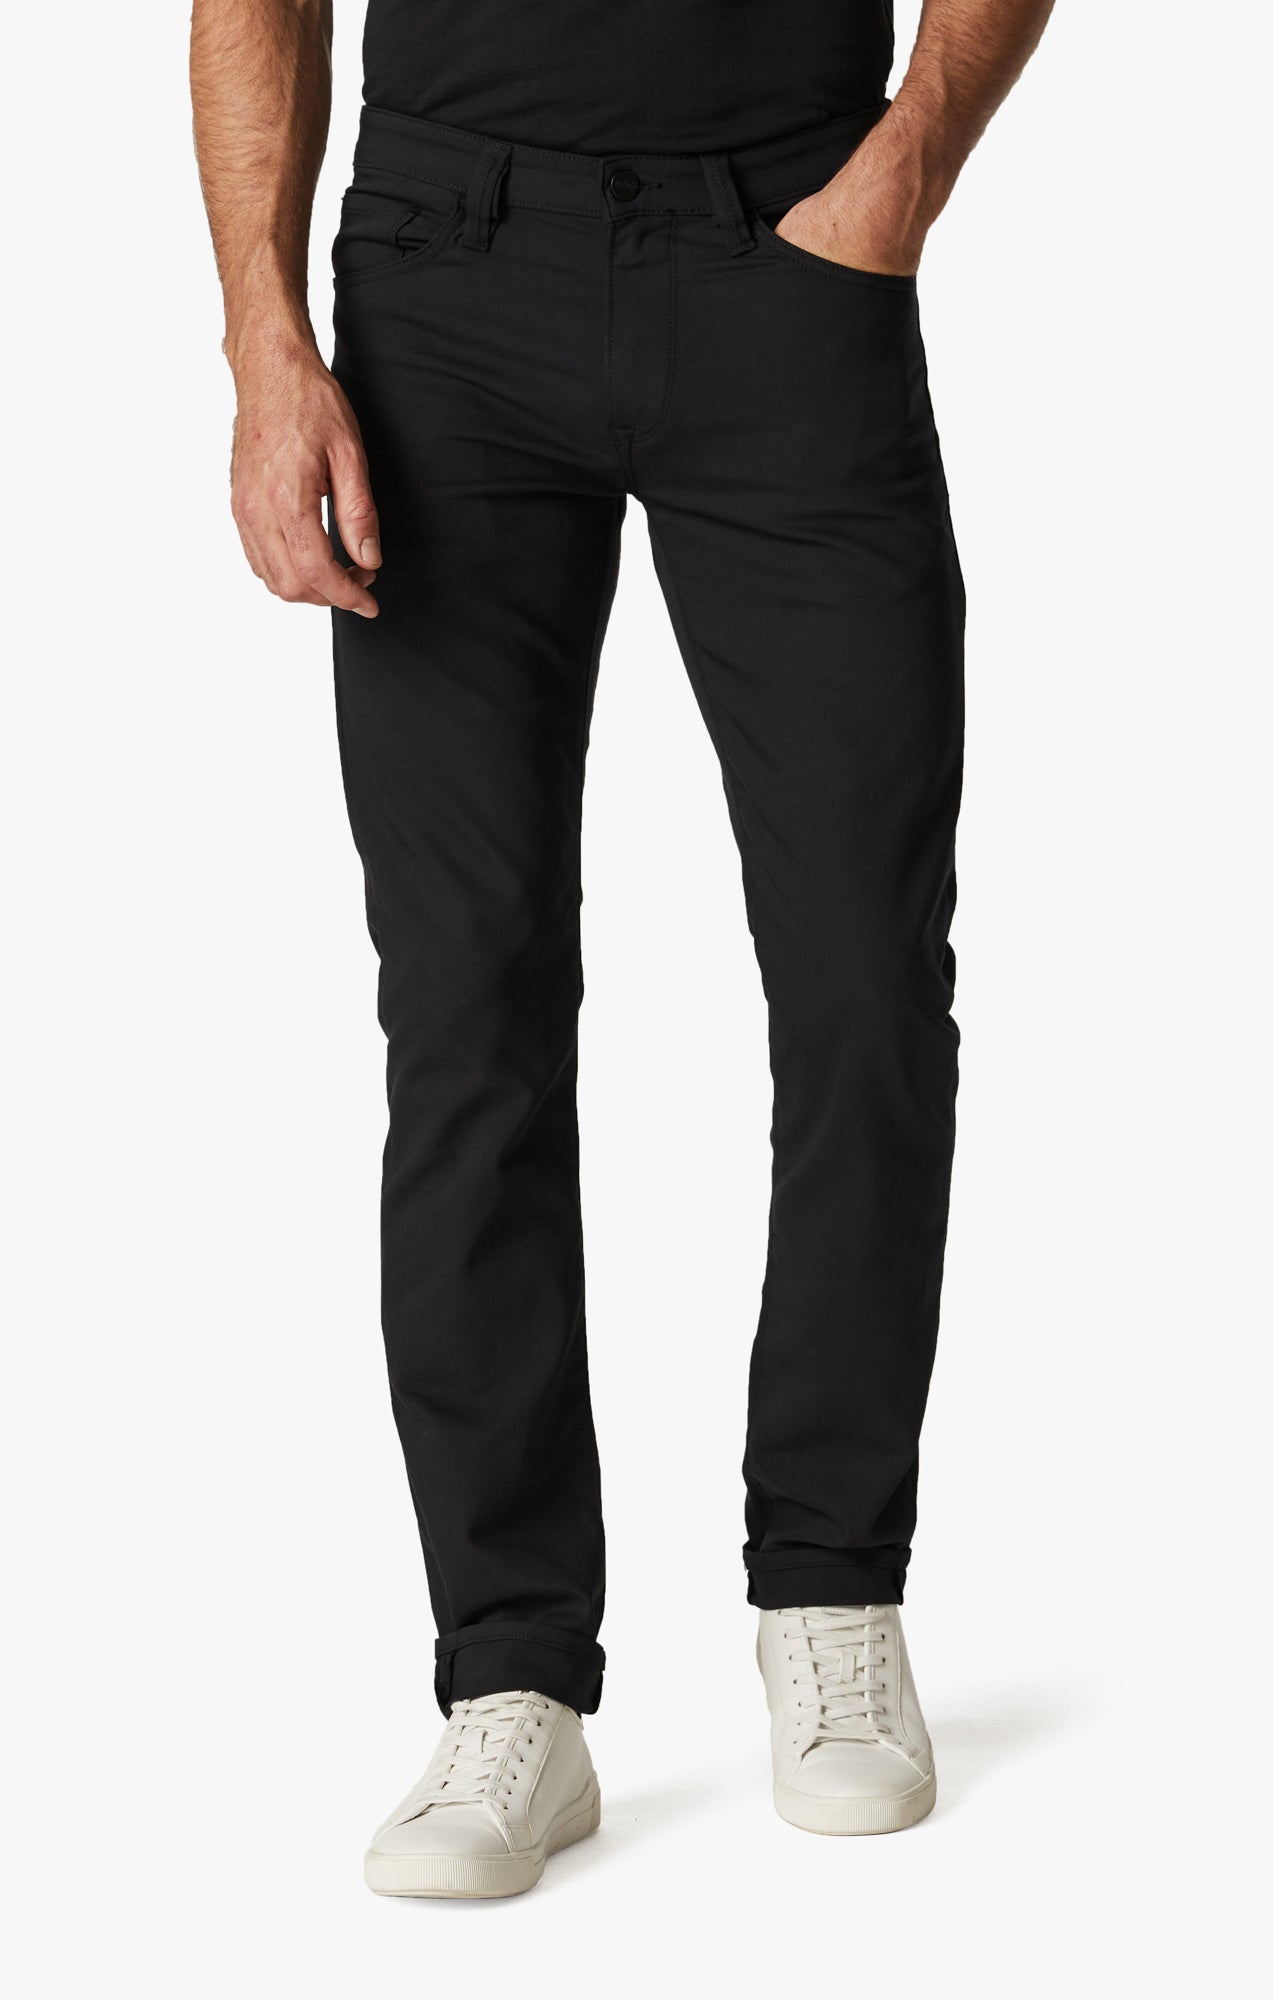 Courage Straight Leg Jeans in Onyx Commuter Image 2